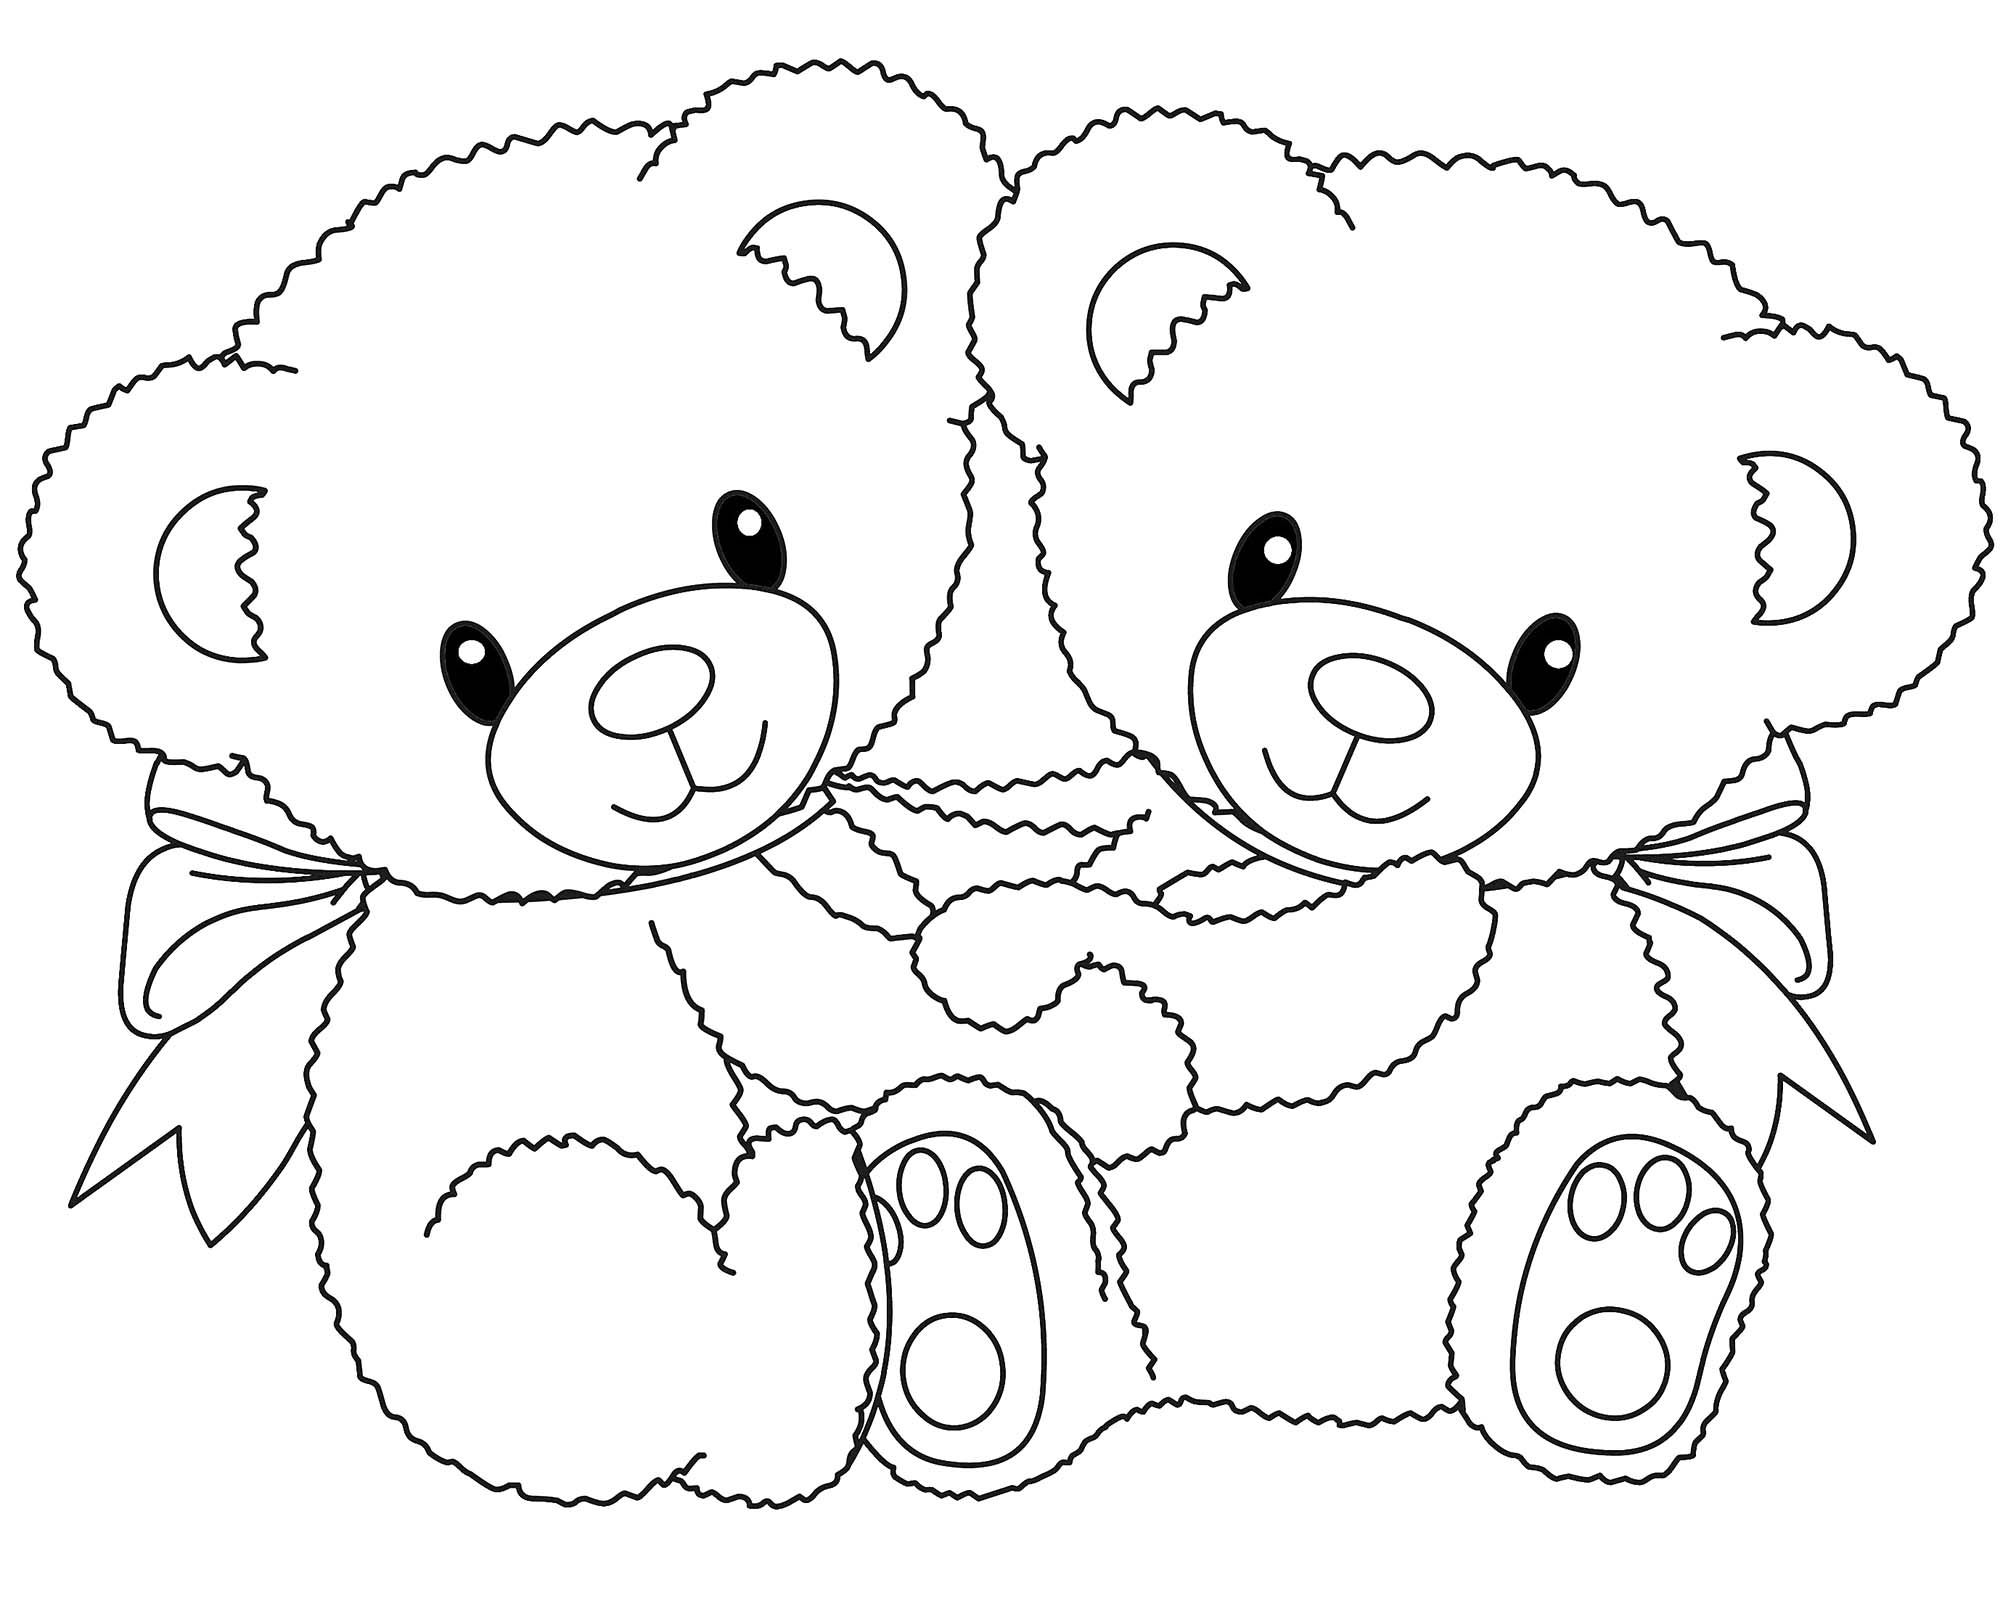 Hug Coloring Pages at GetColorings.com | Free printable colorings pages